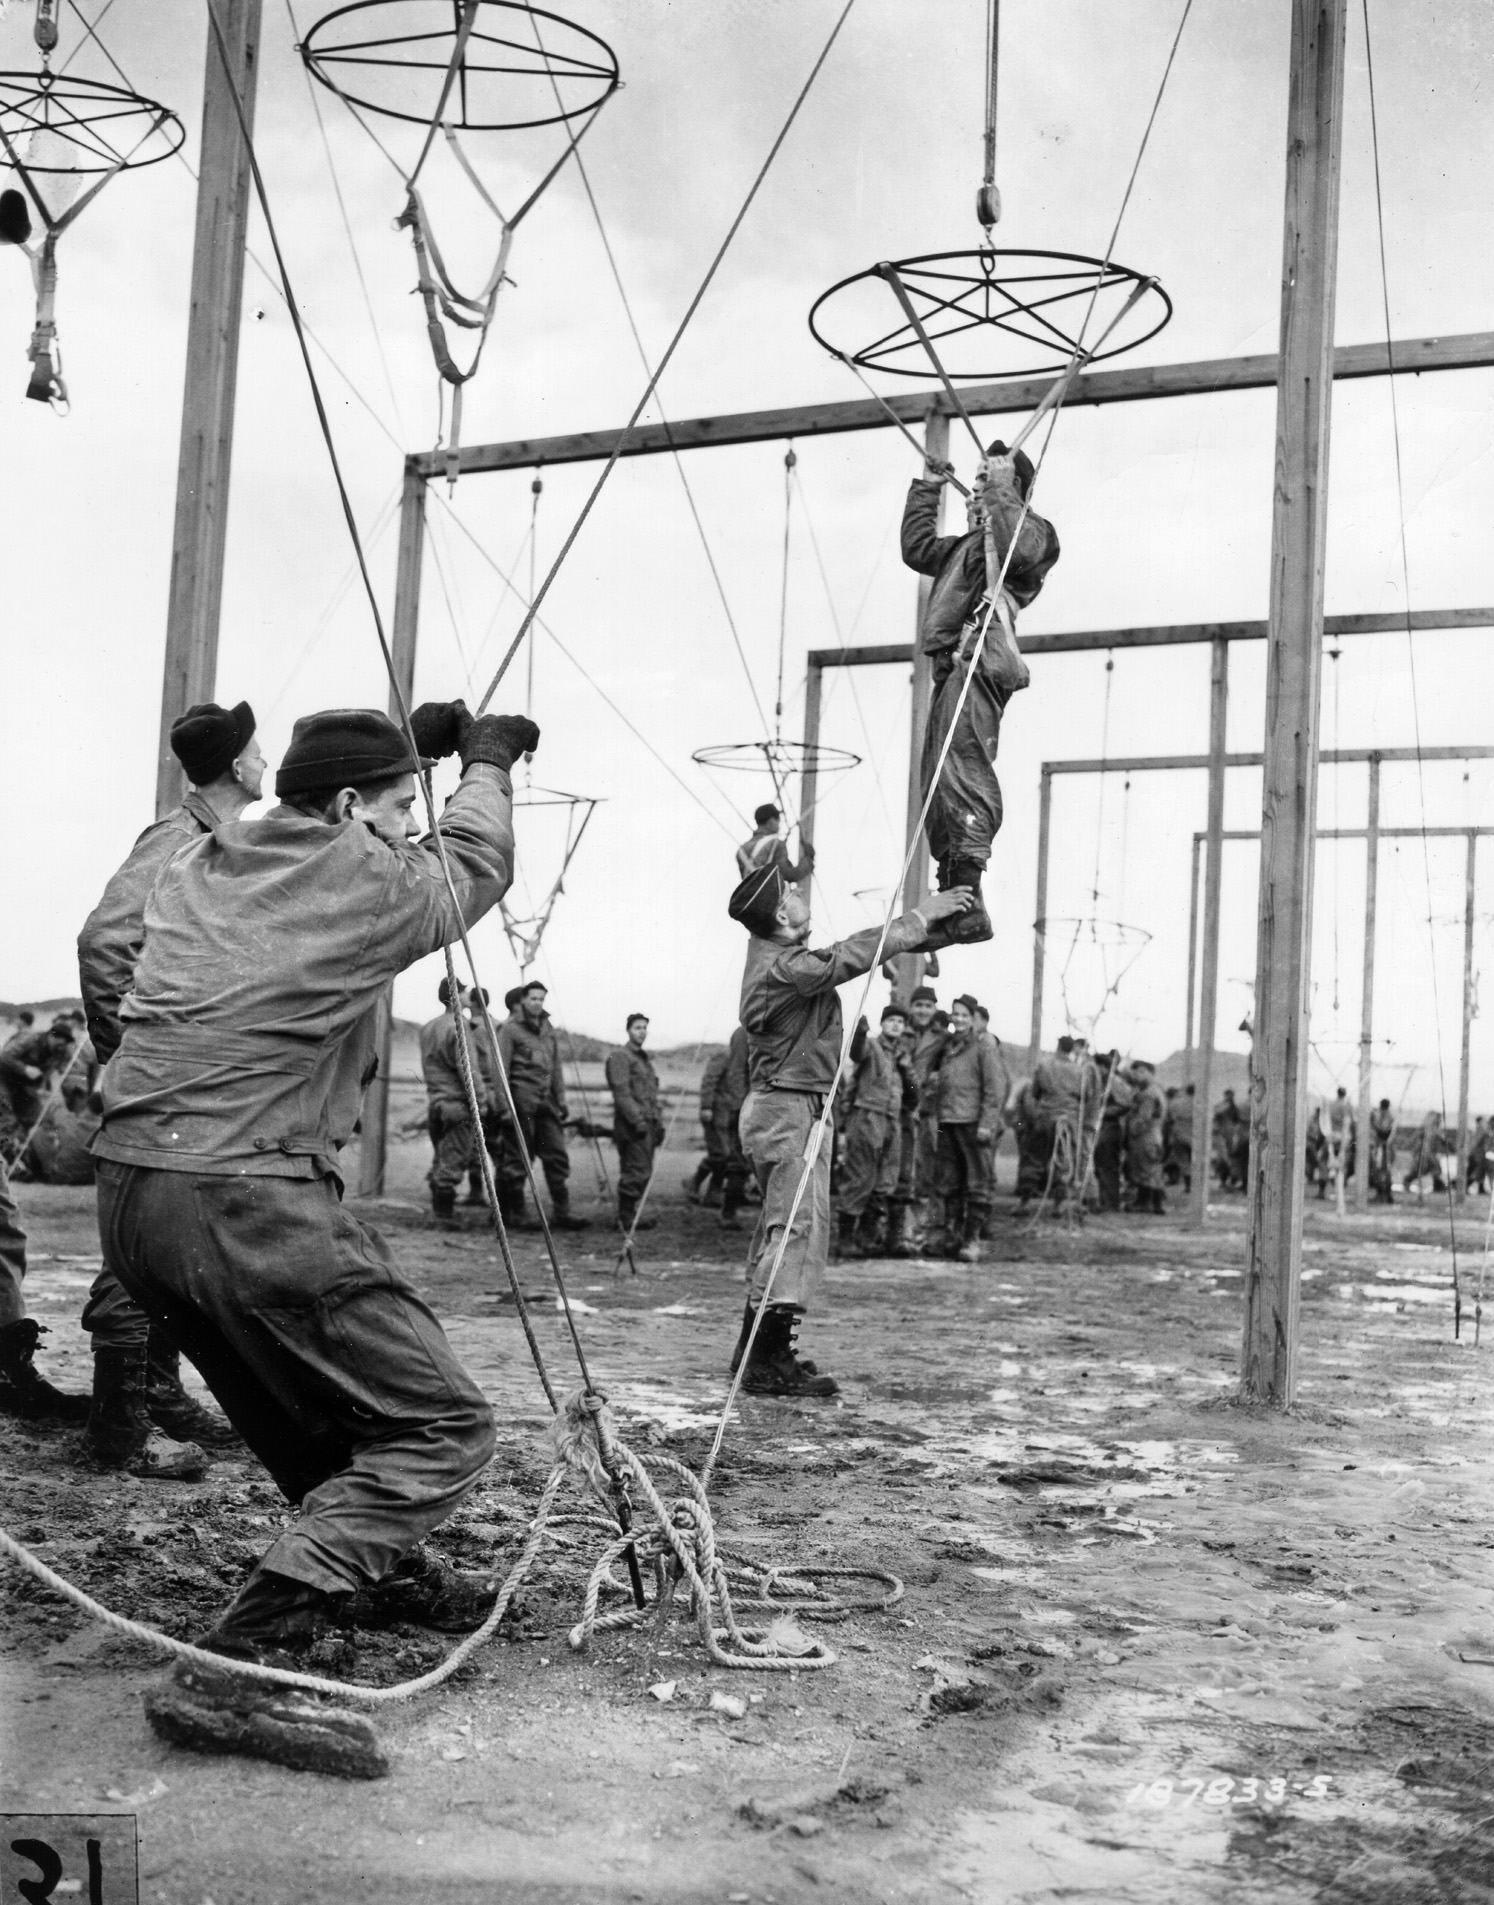 Training for members of the 1st Special Service Force was rigorous, and in this photo soldiers prepare for airborne operations at Fort William Henry Harrison, Montana. During the U.S.-Canadian force’s airborne training phase, Frederick, the unit’s commander, made his first parachute jump.